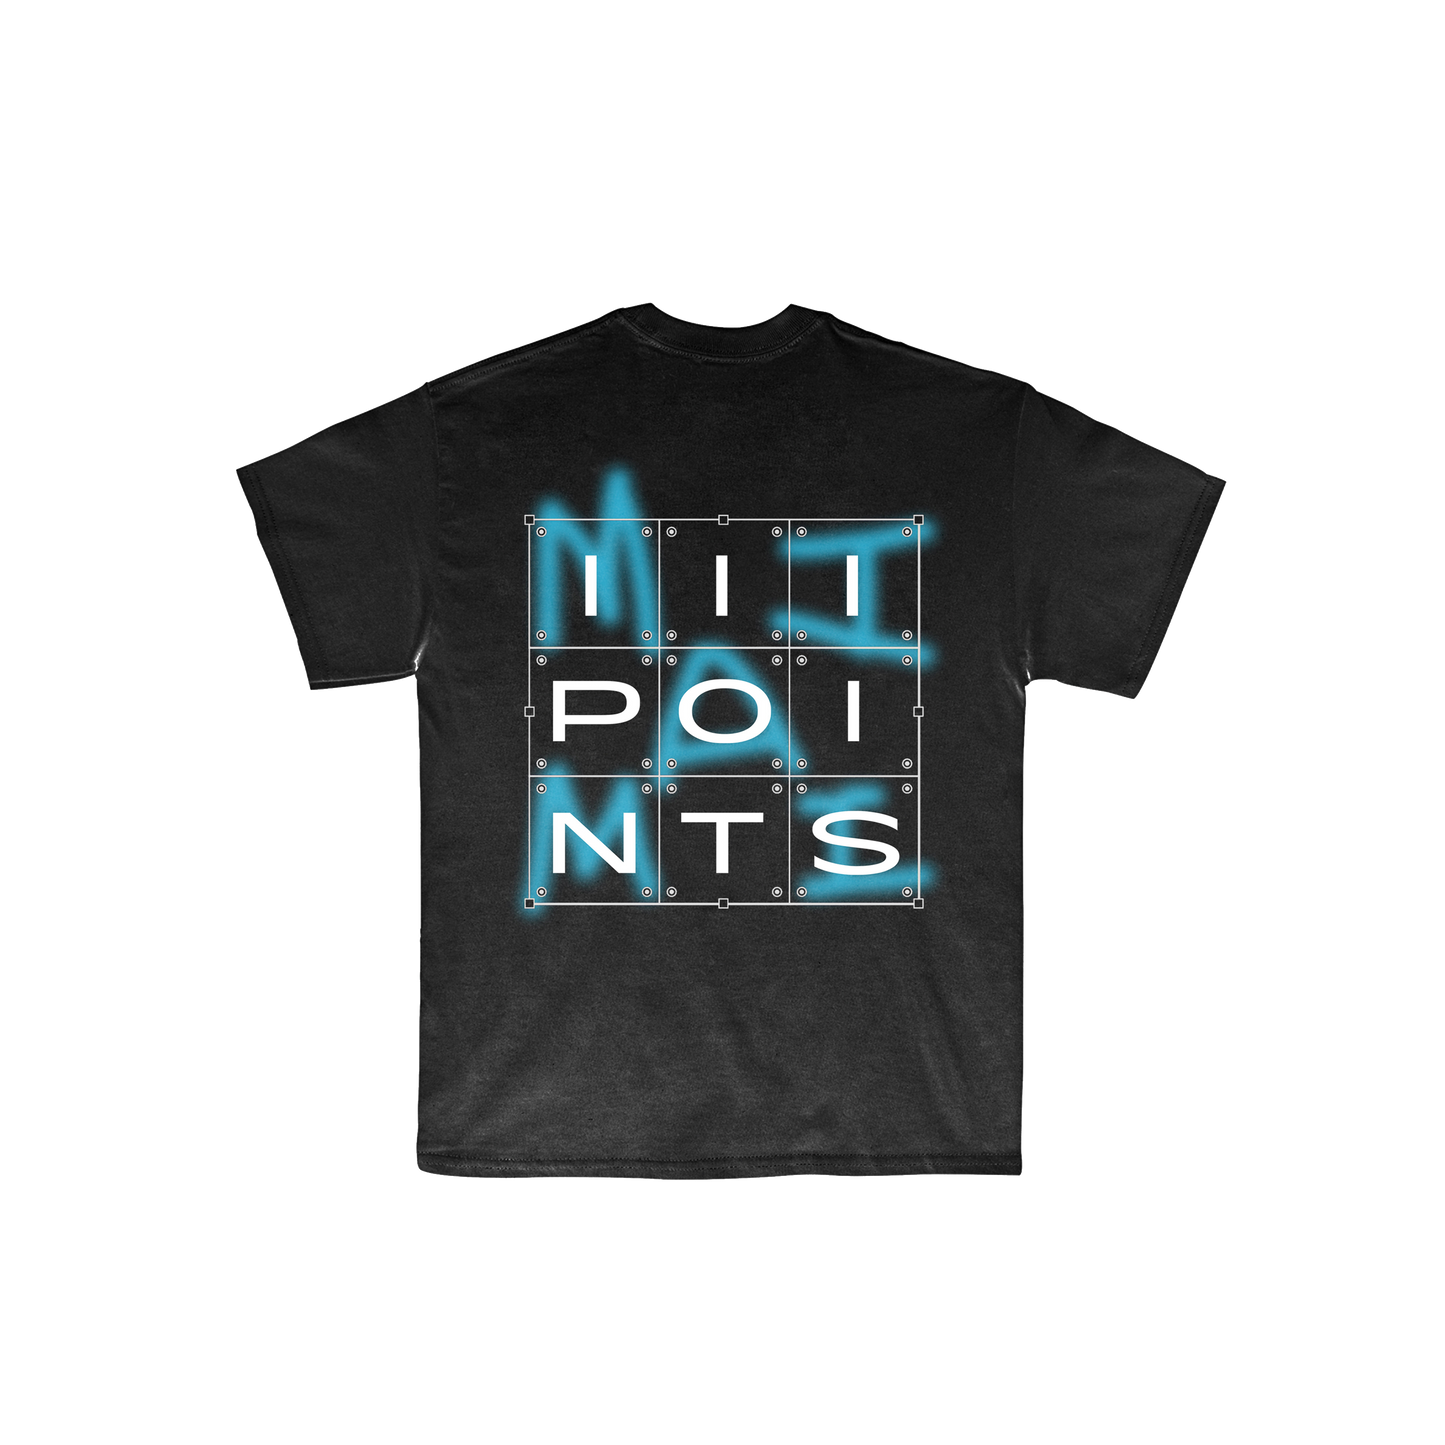 III Points 23 S3quenc3 Black Tee